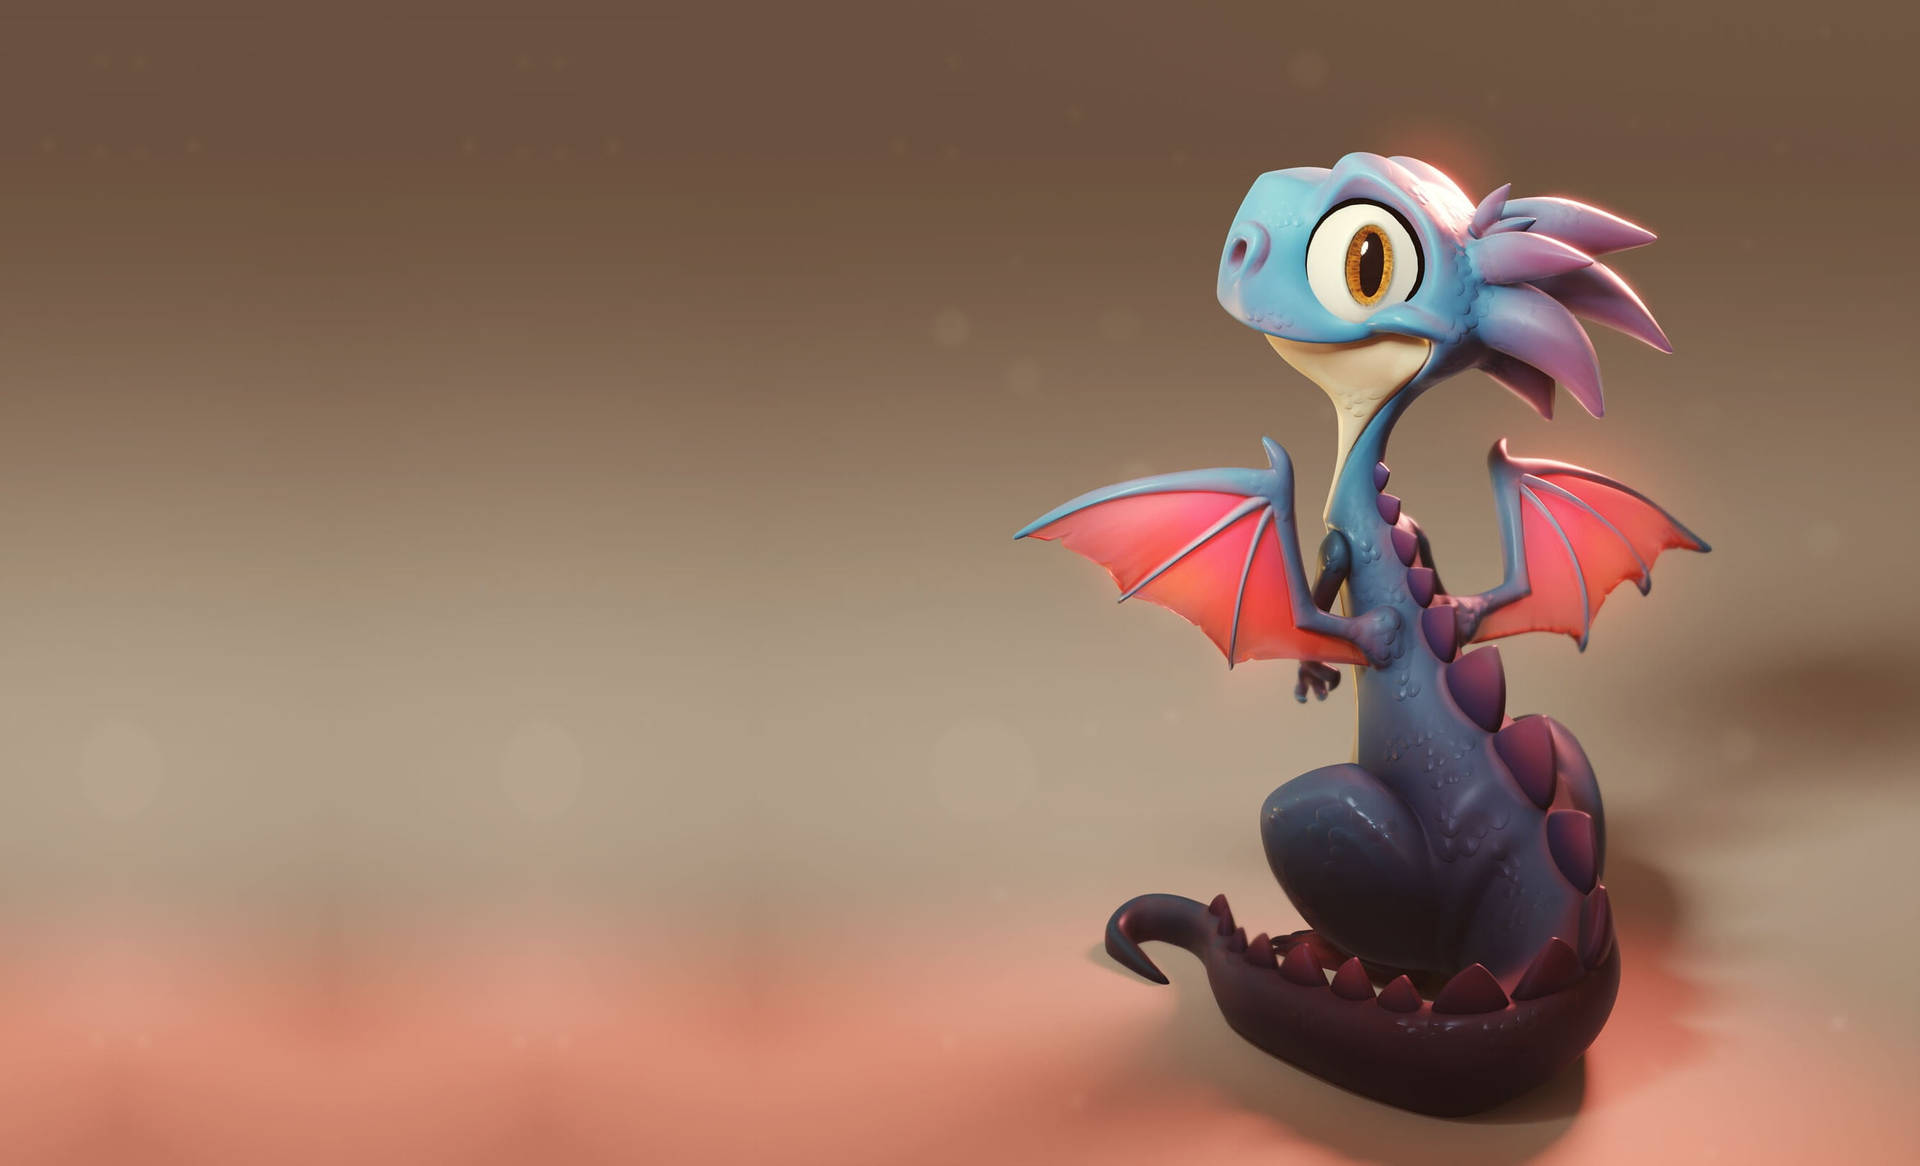 3d Animated Baby Dragon Wallpaper